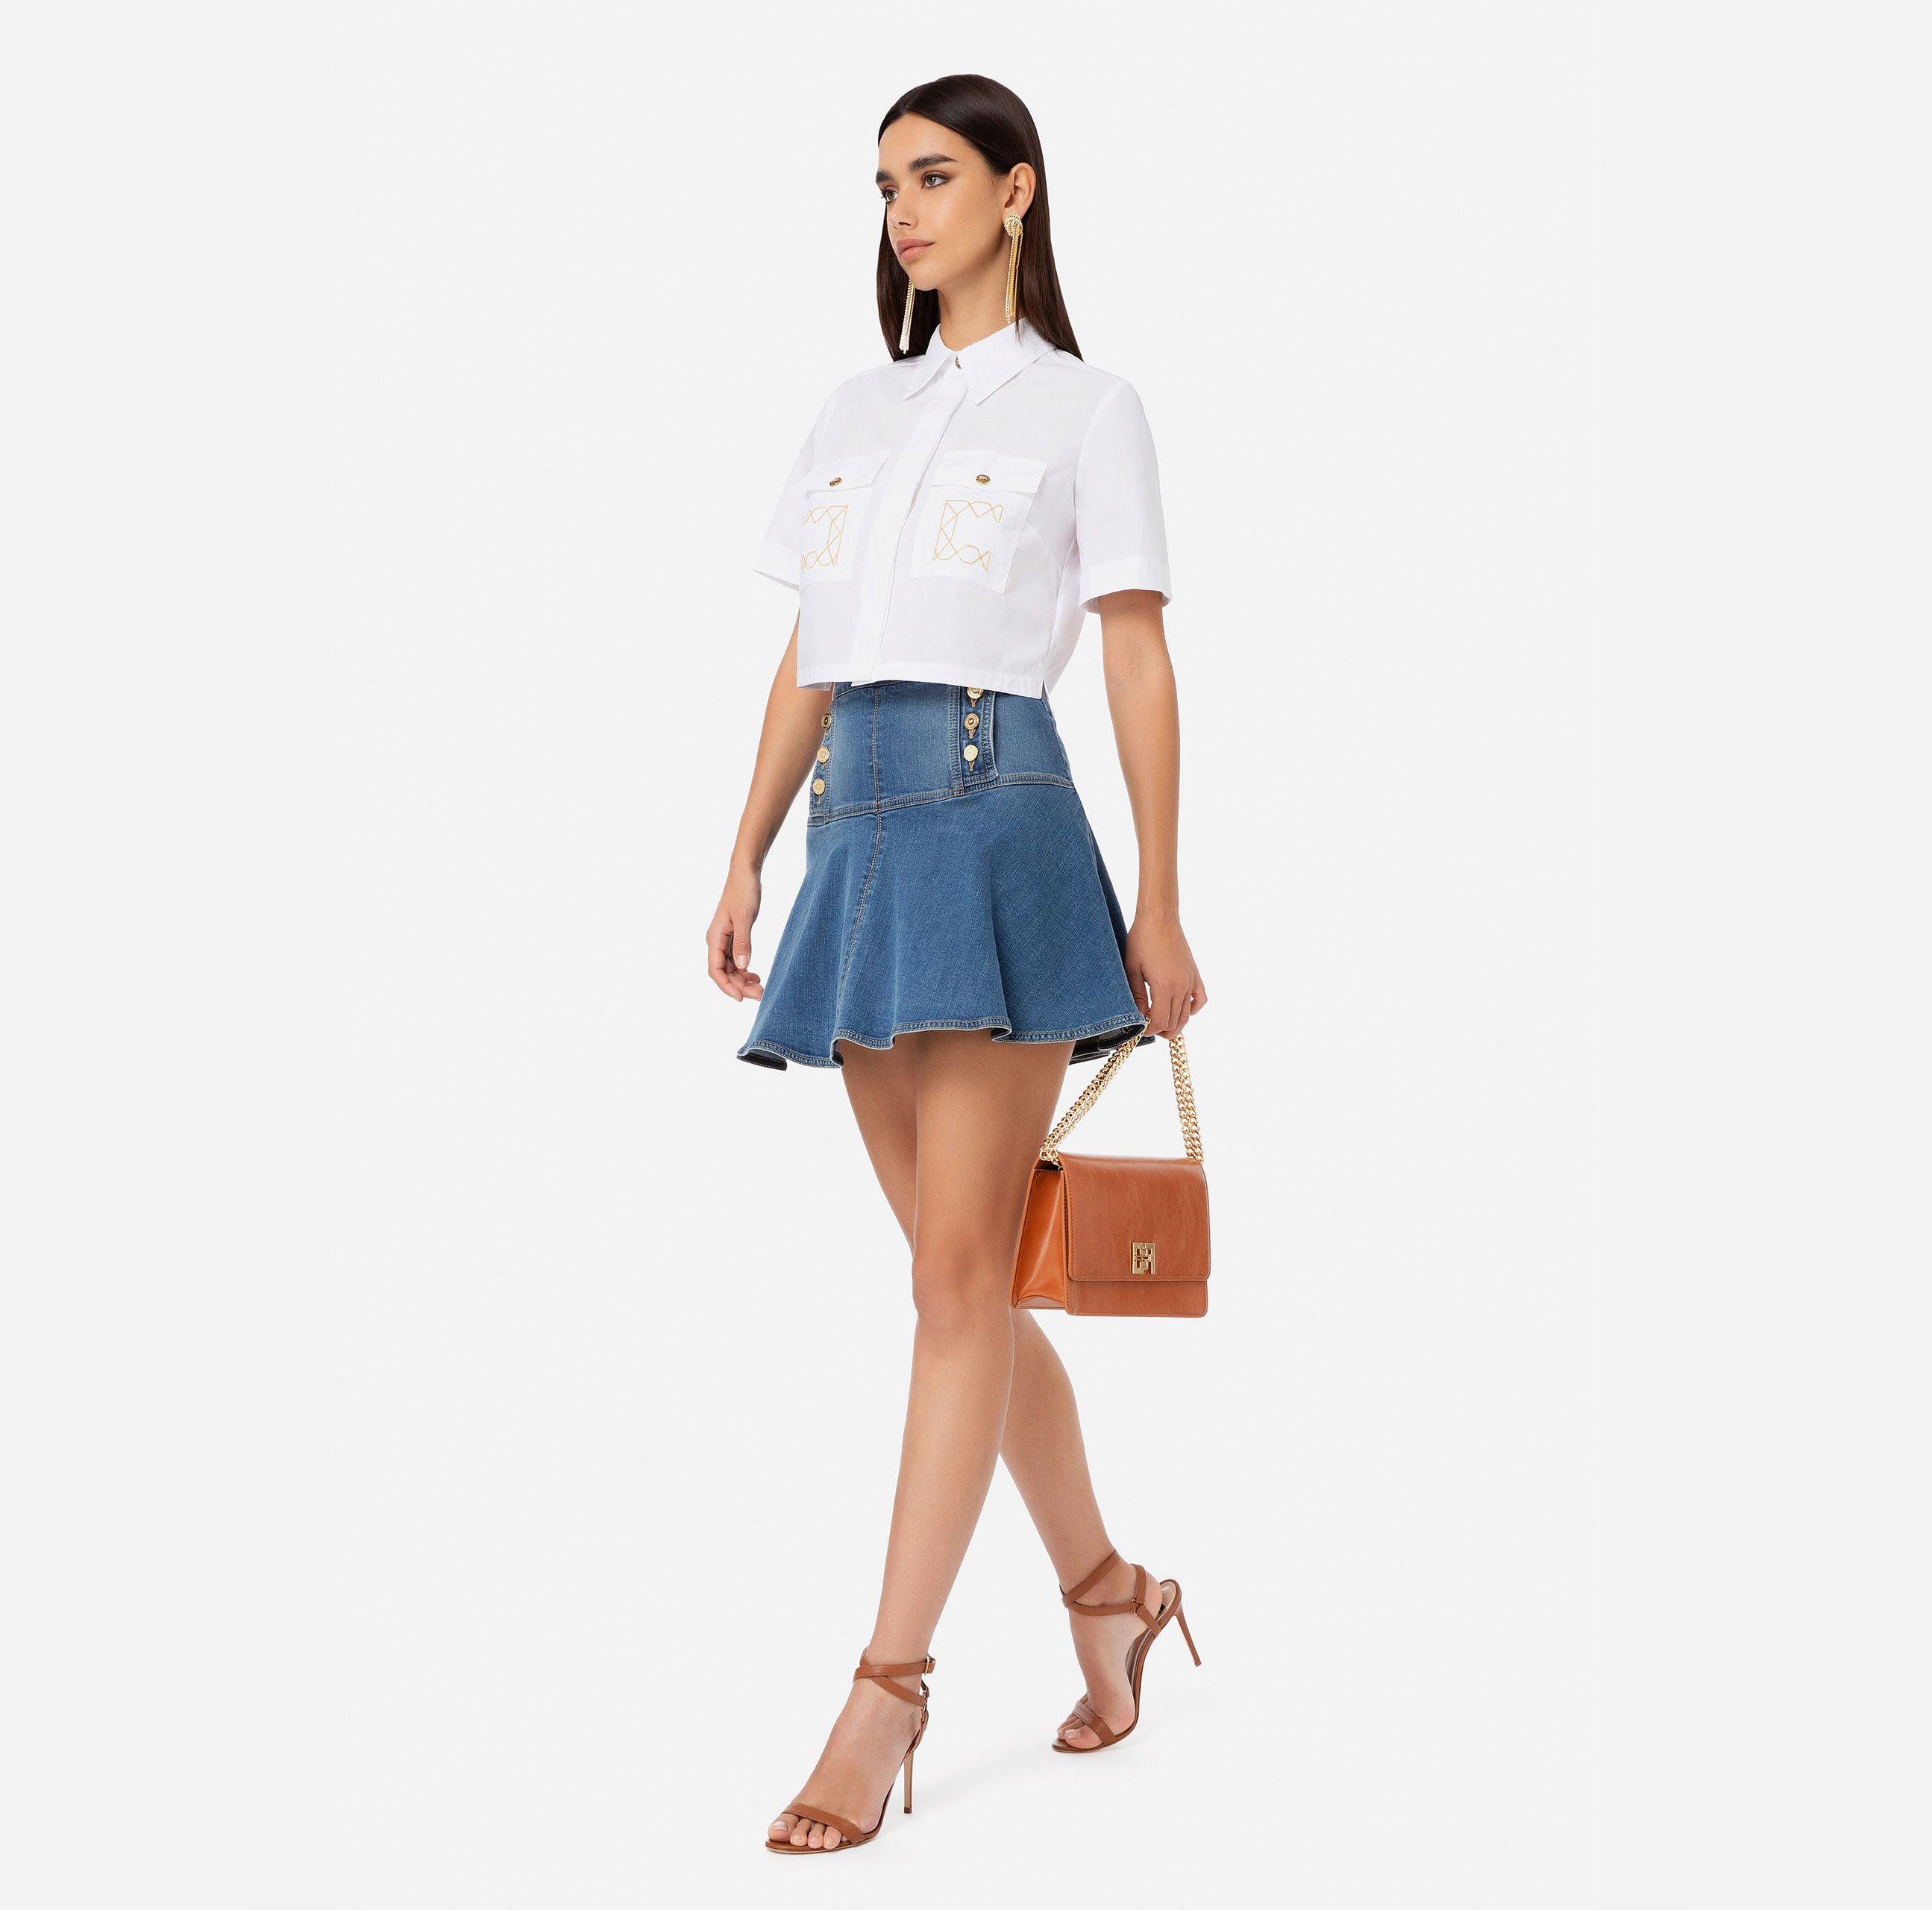 Miniskirt with buttons on the hips - Elisabetta Franchi